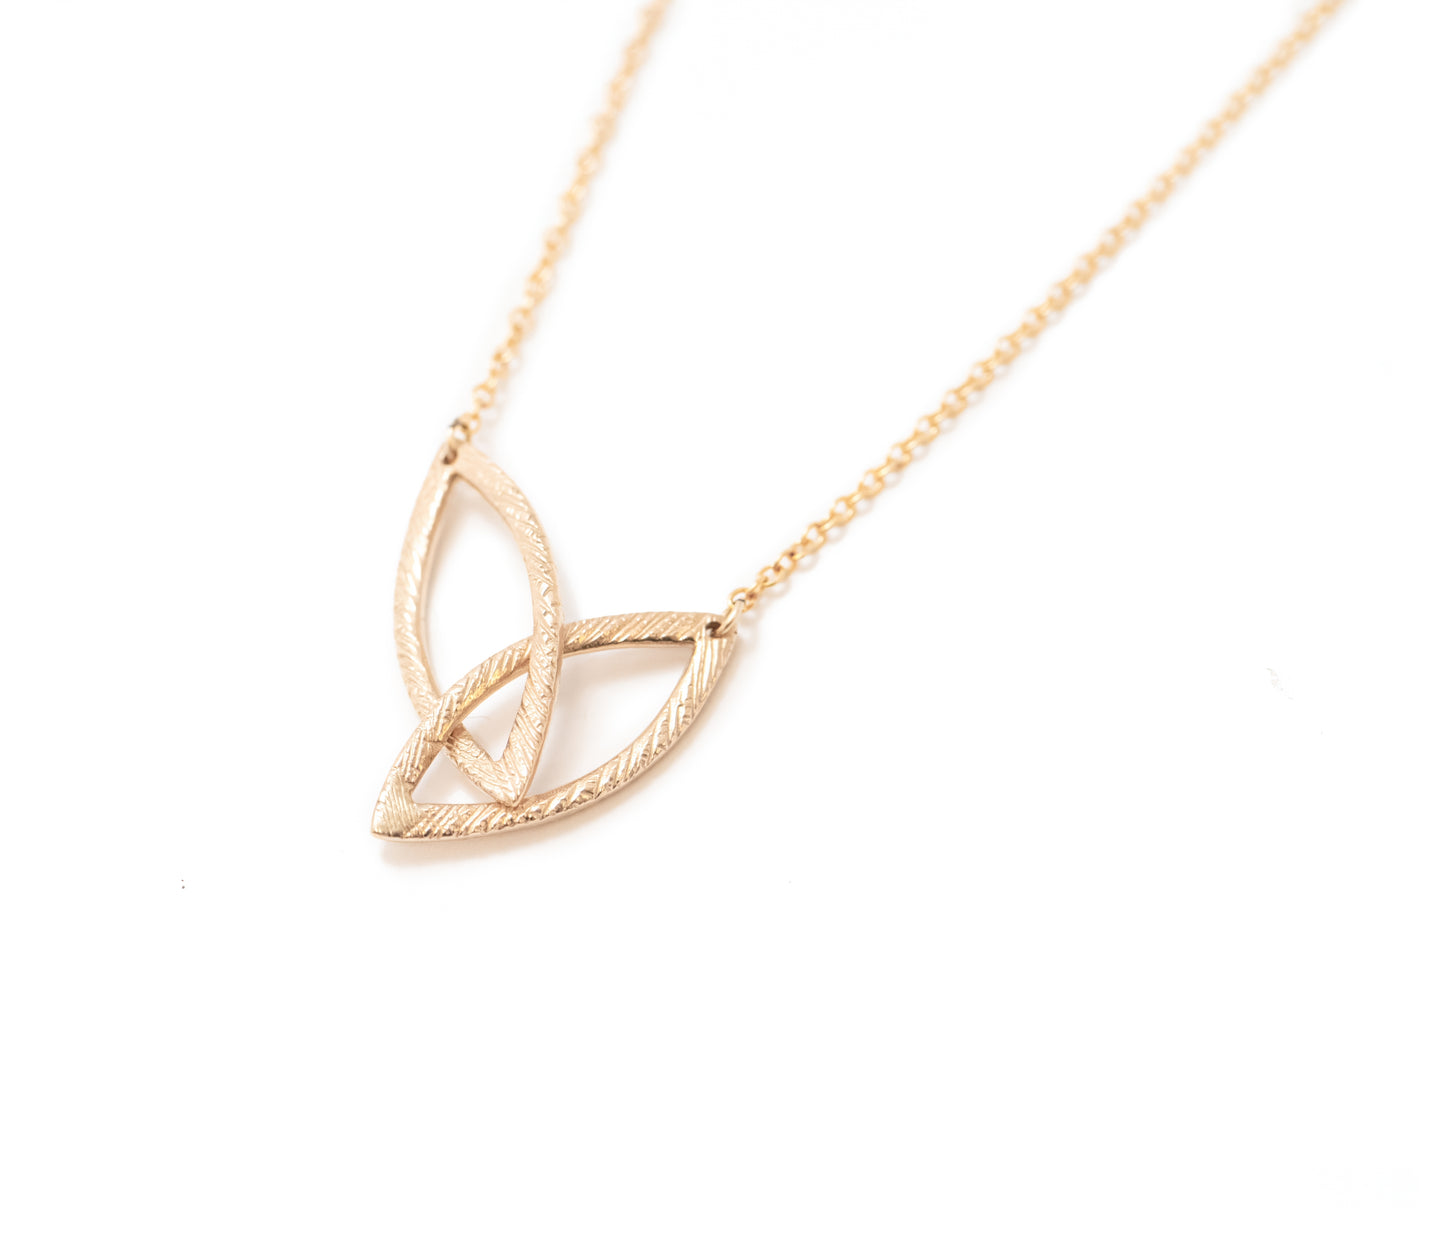 Feathered Marquise Link Necklace - 14k